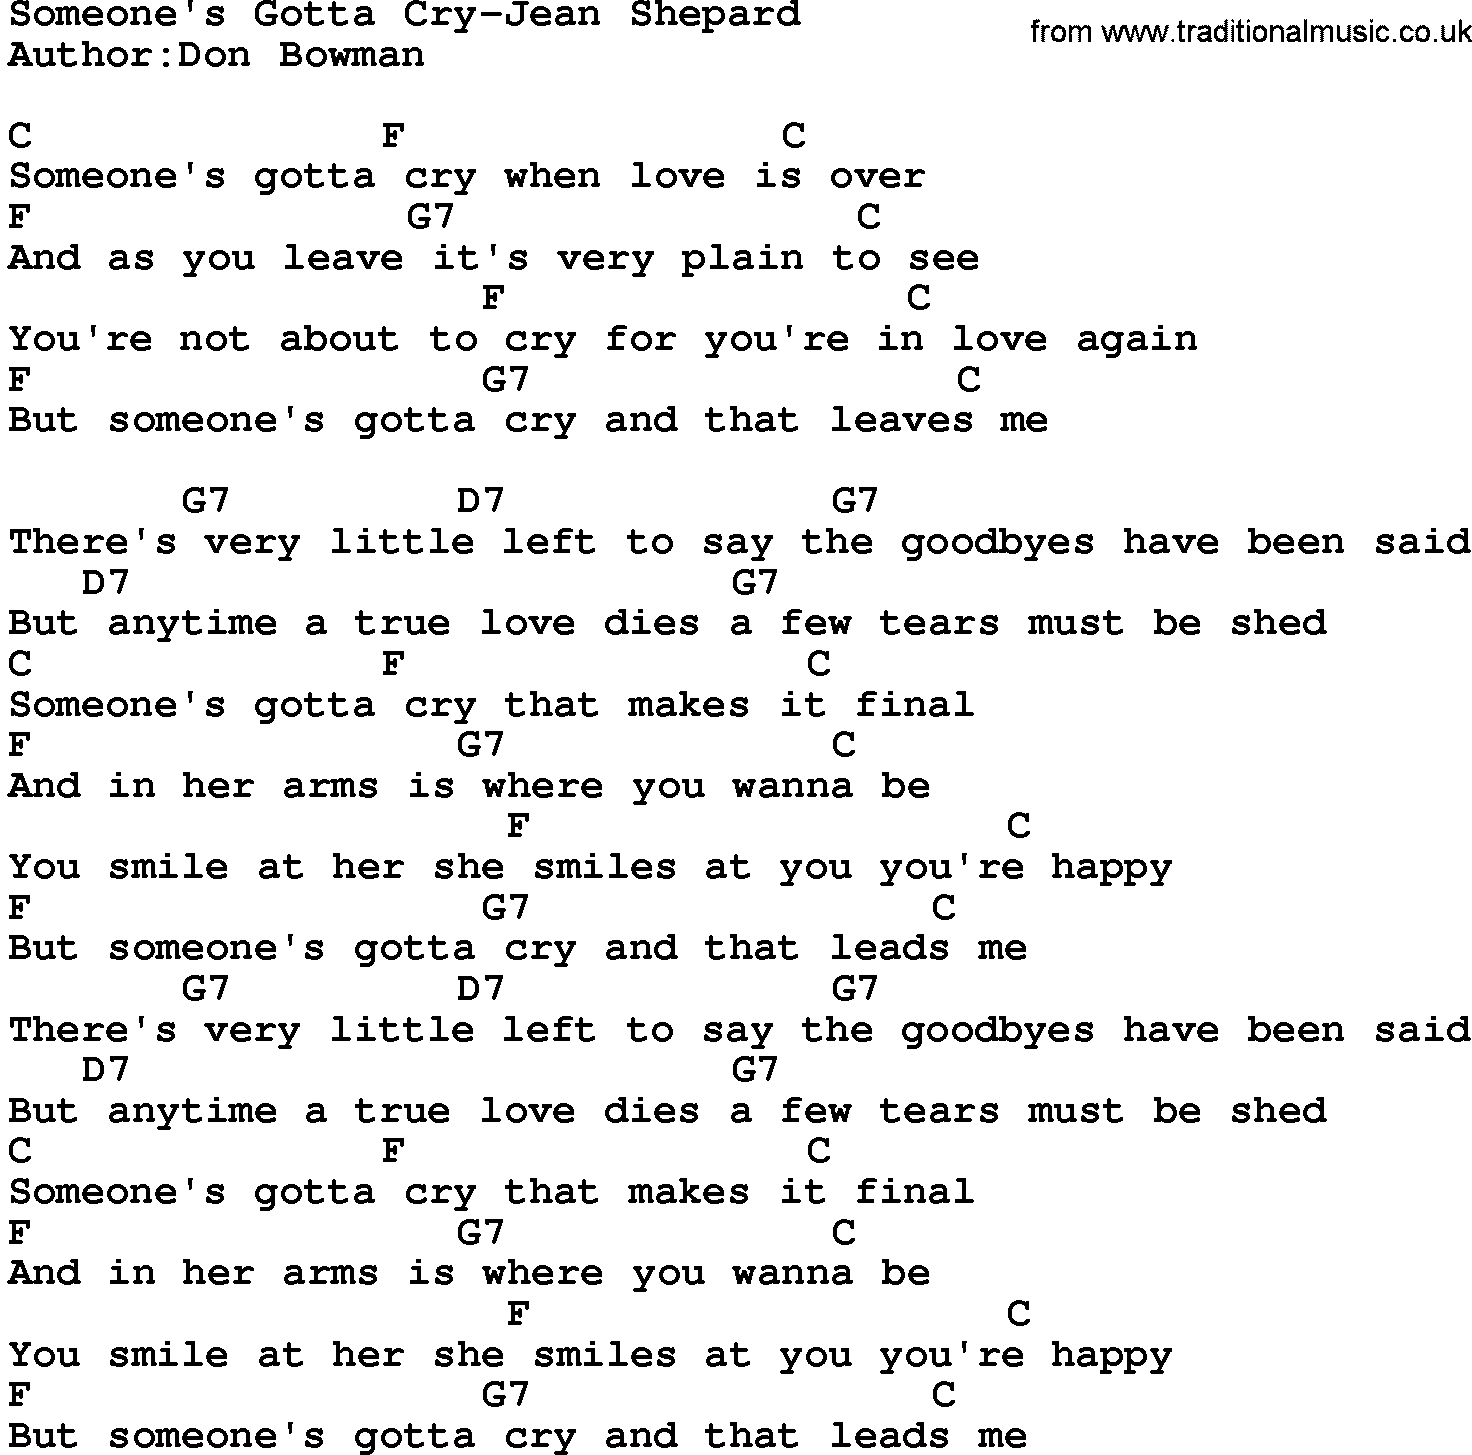 Country music song: Someone's Gotta Cry-Jean Shepard lyrics and chords